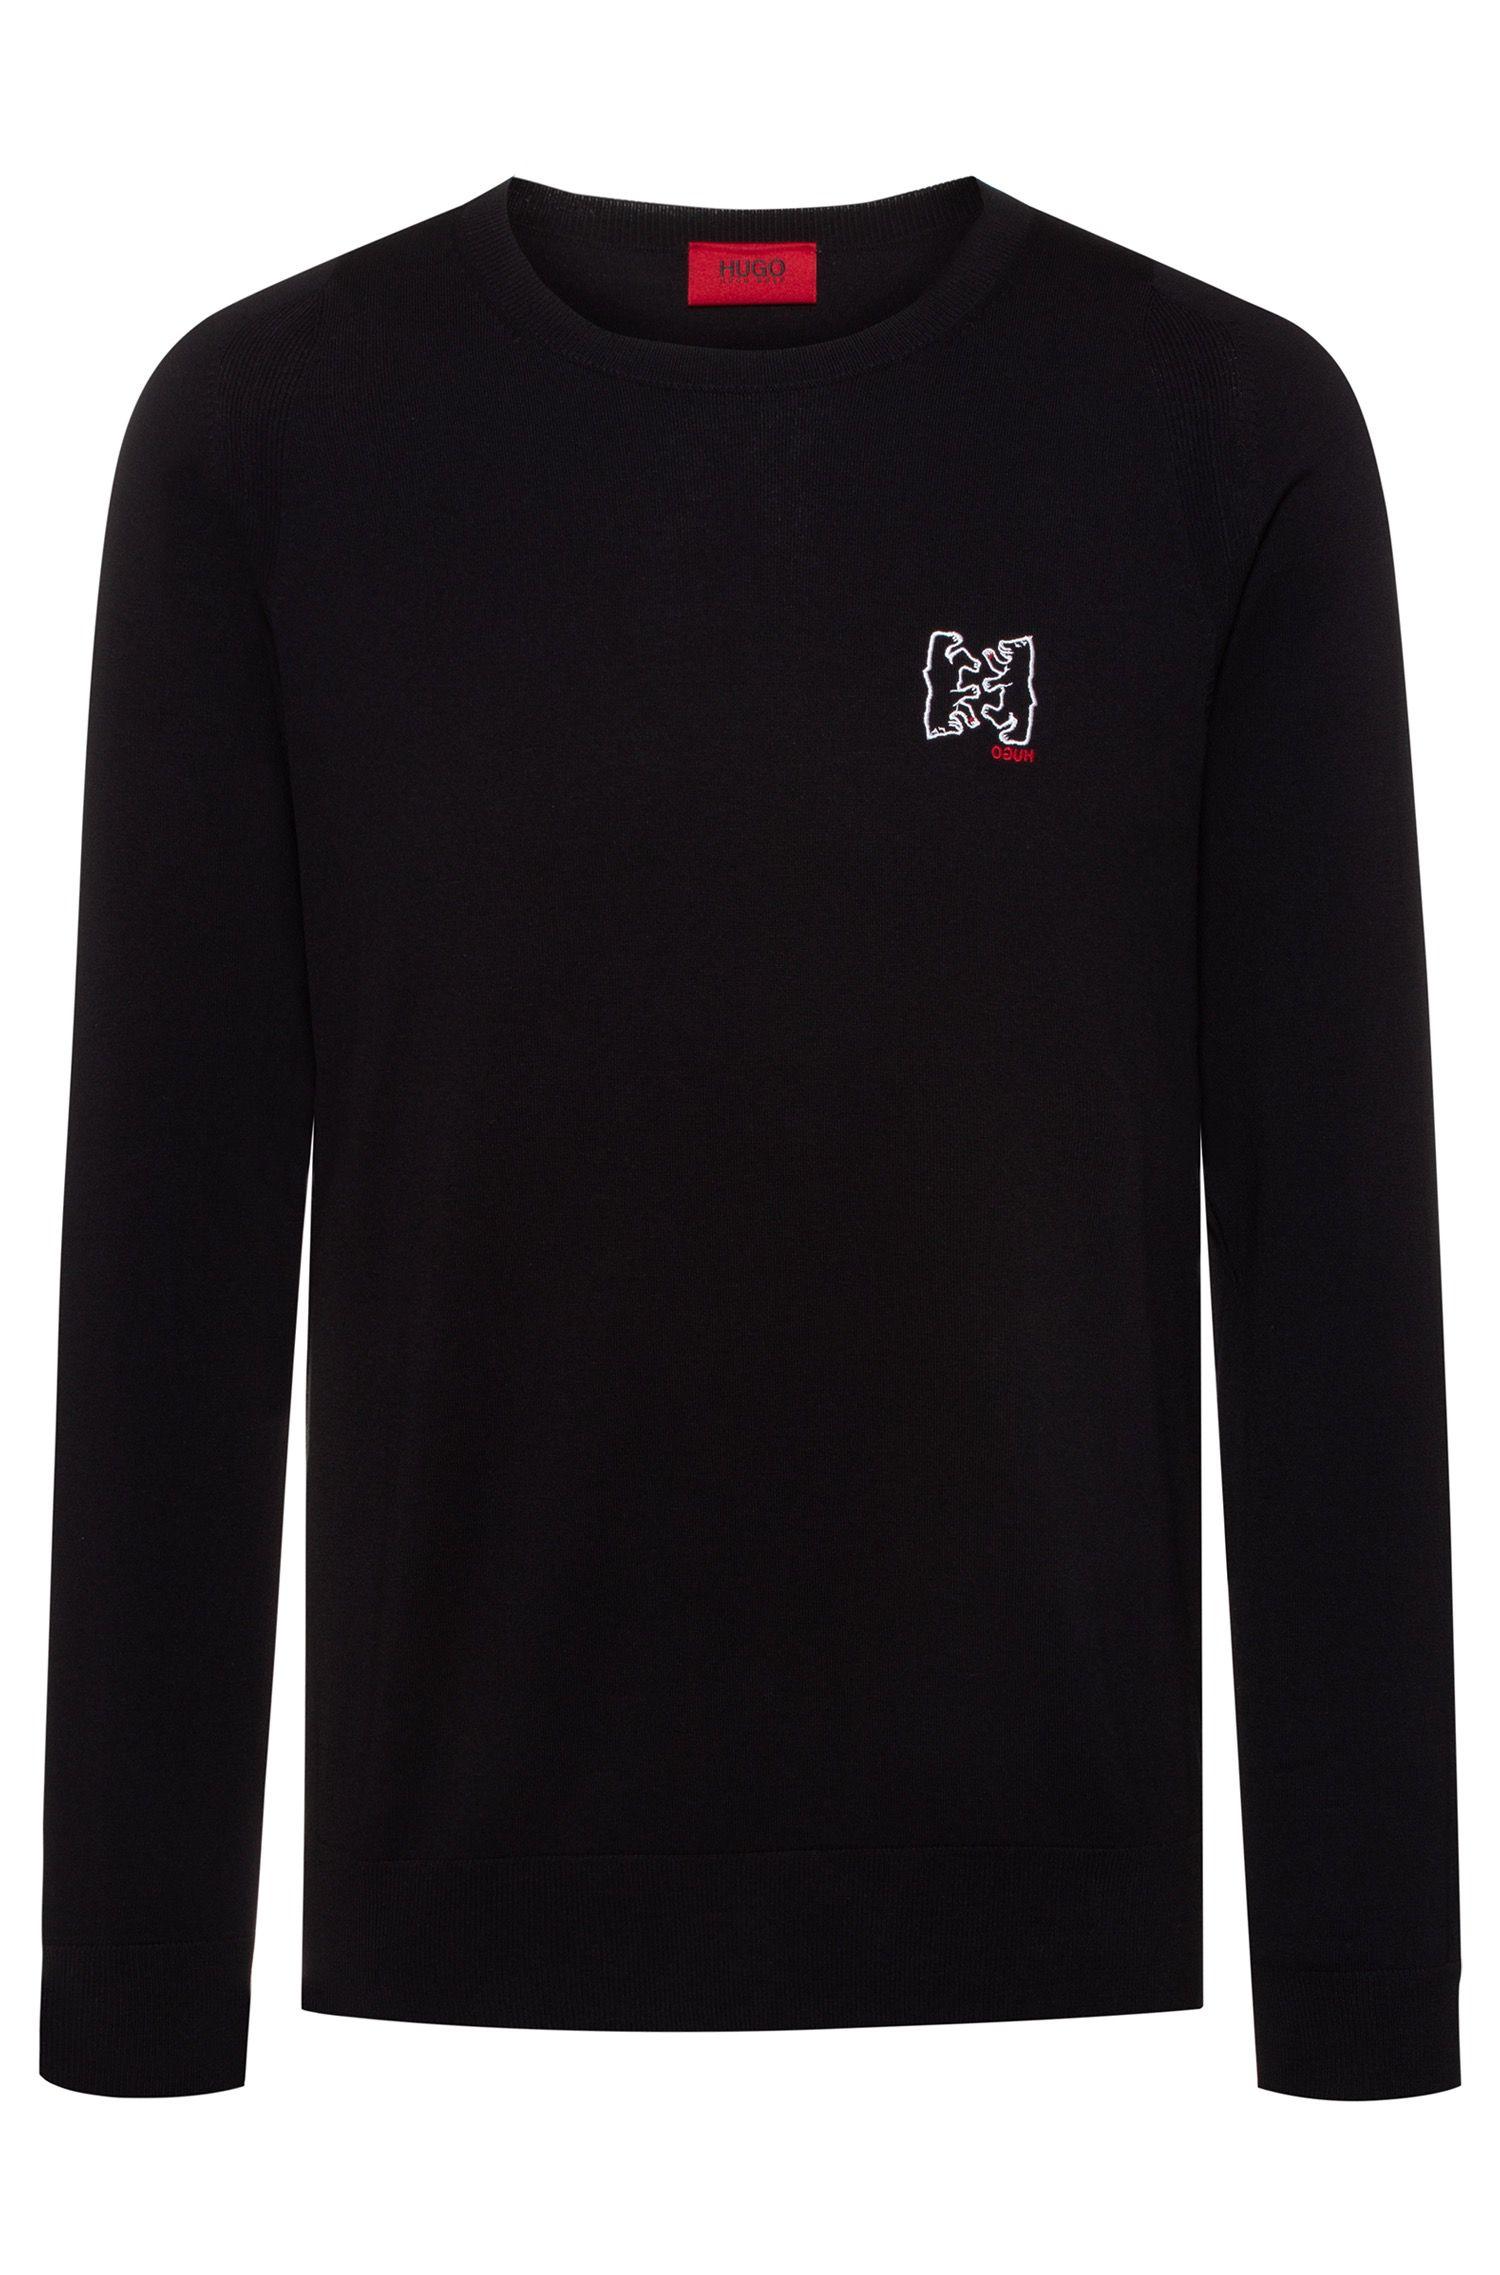 HUGO Cotton-blend Knitted Sweater With Bear Motifs in Black for Men - Lyst